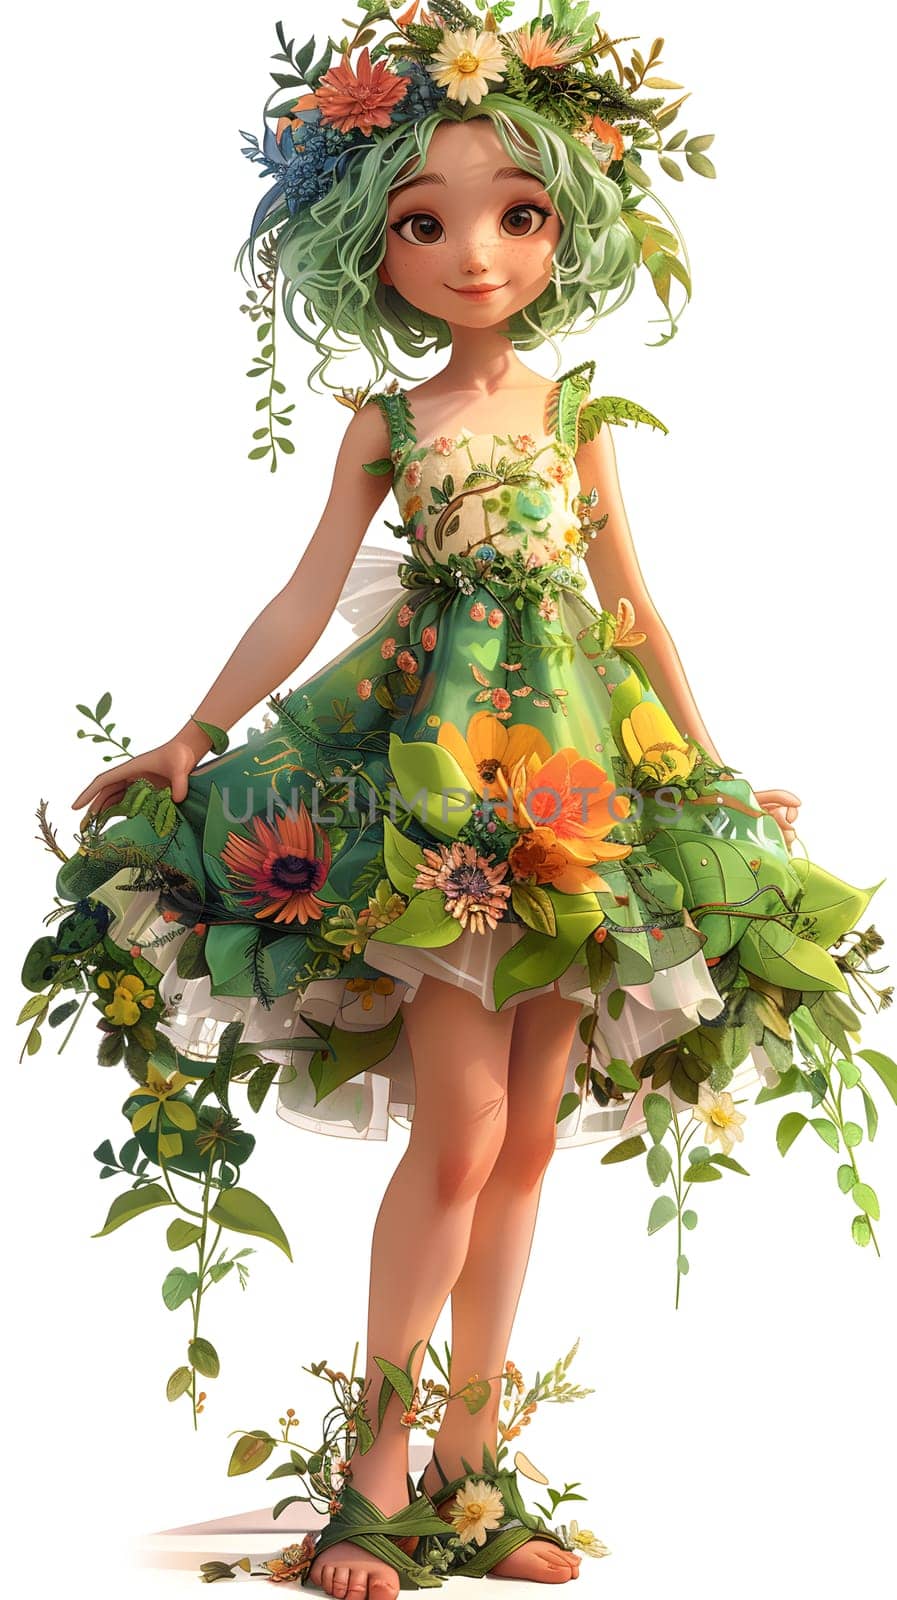 A doll with green hair is dressed in a green day dress, adorned with a wreath of flowers. The outfit is a cute baby and toddler clothing, perfect for a special event